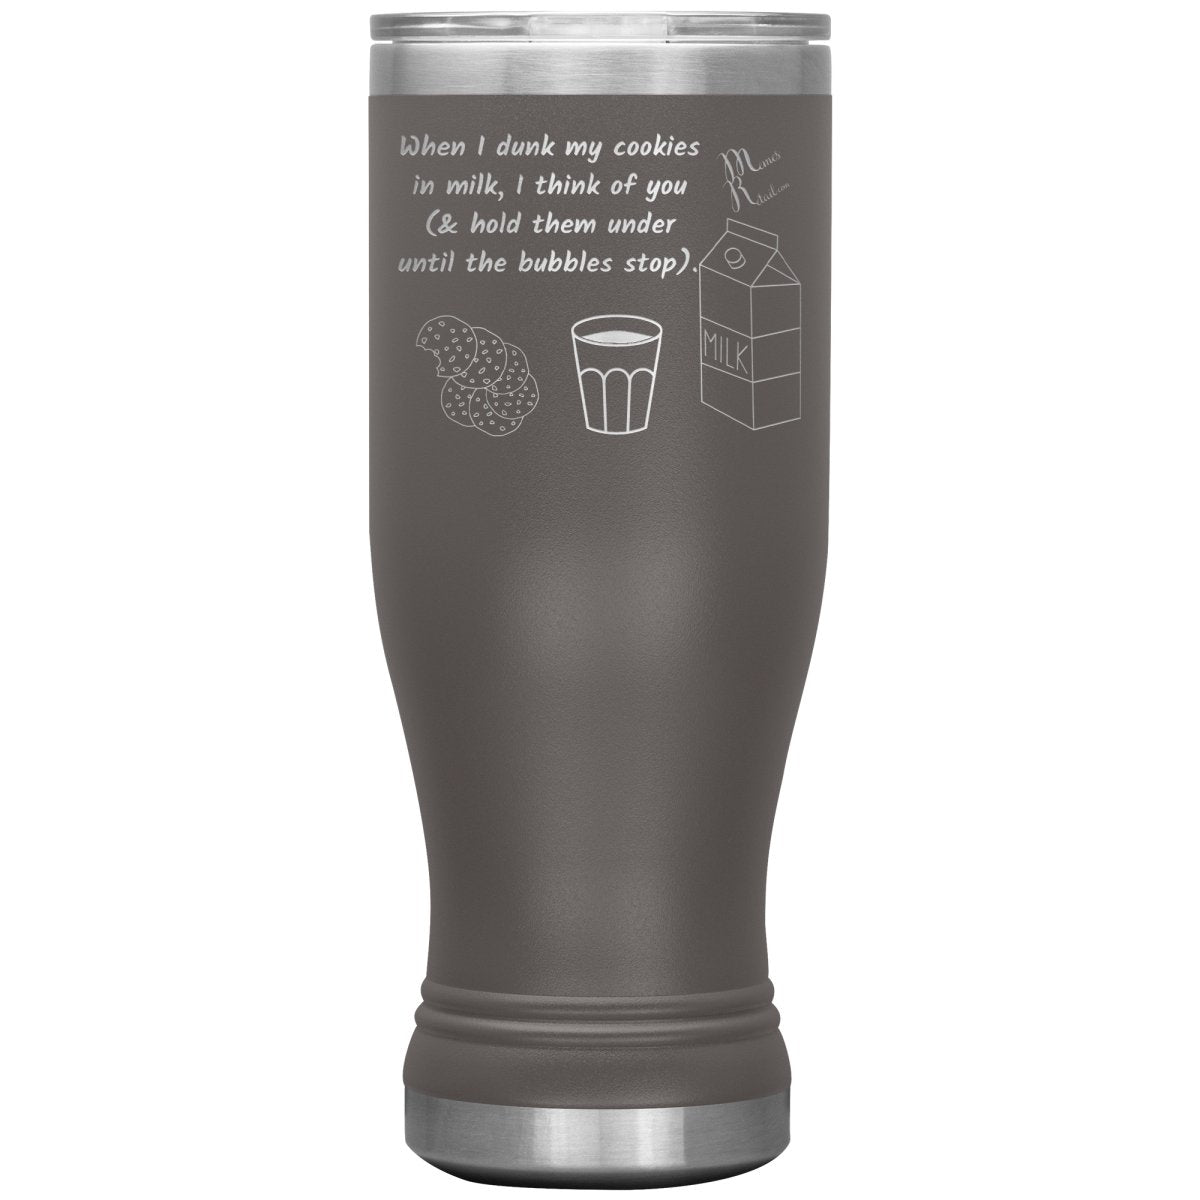 When I dunk My Cookies in Milk, I think of You - Tumblers, 20oz BOHO Insulated Tumbler / Pewter - MemesRetail.com